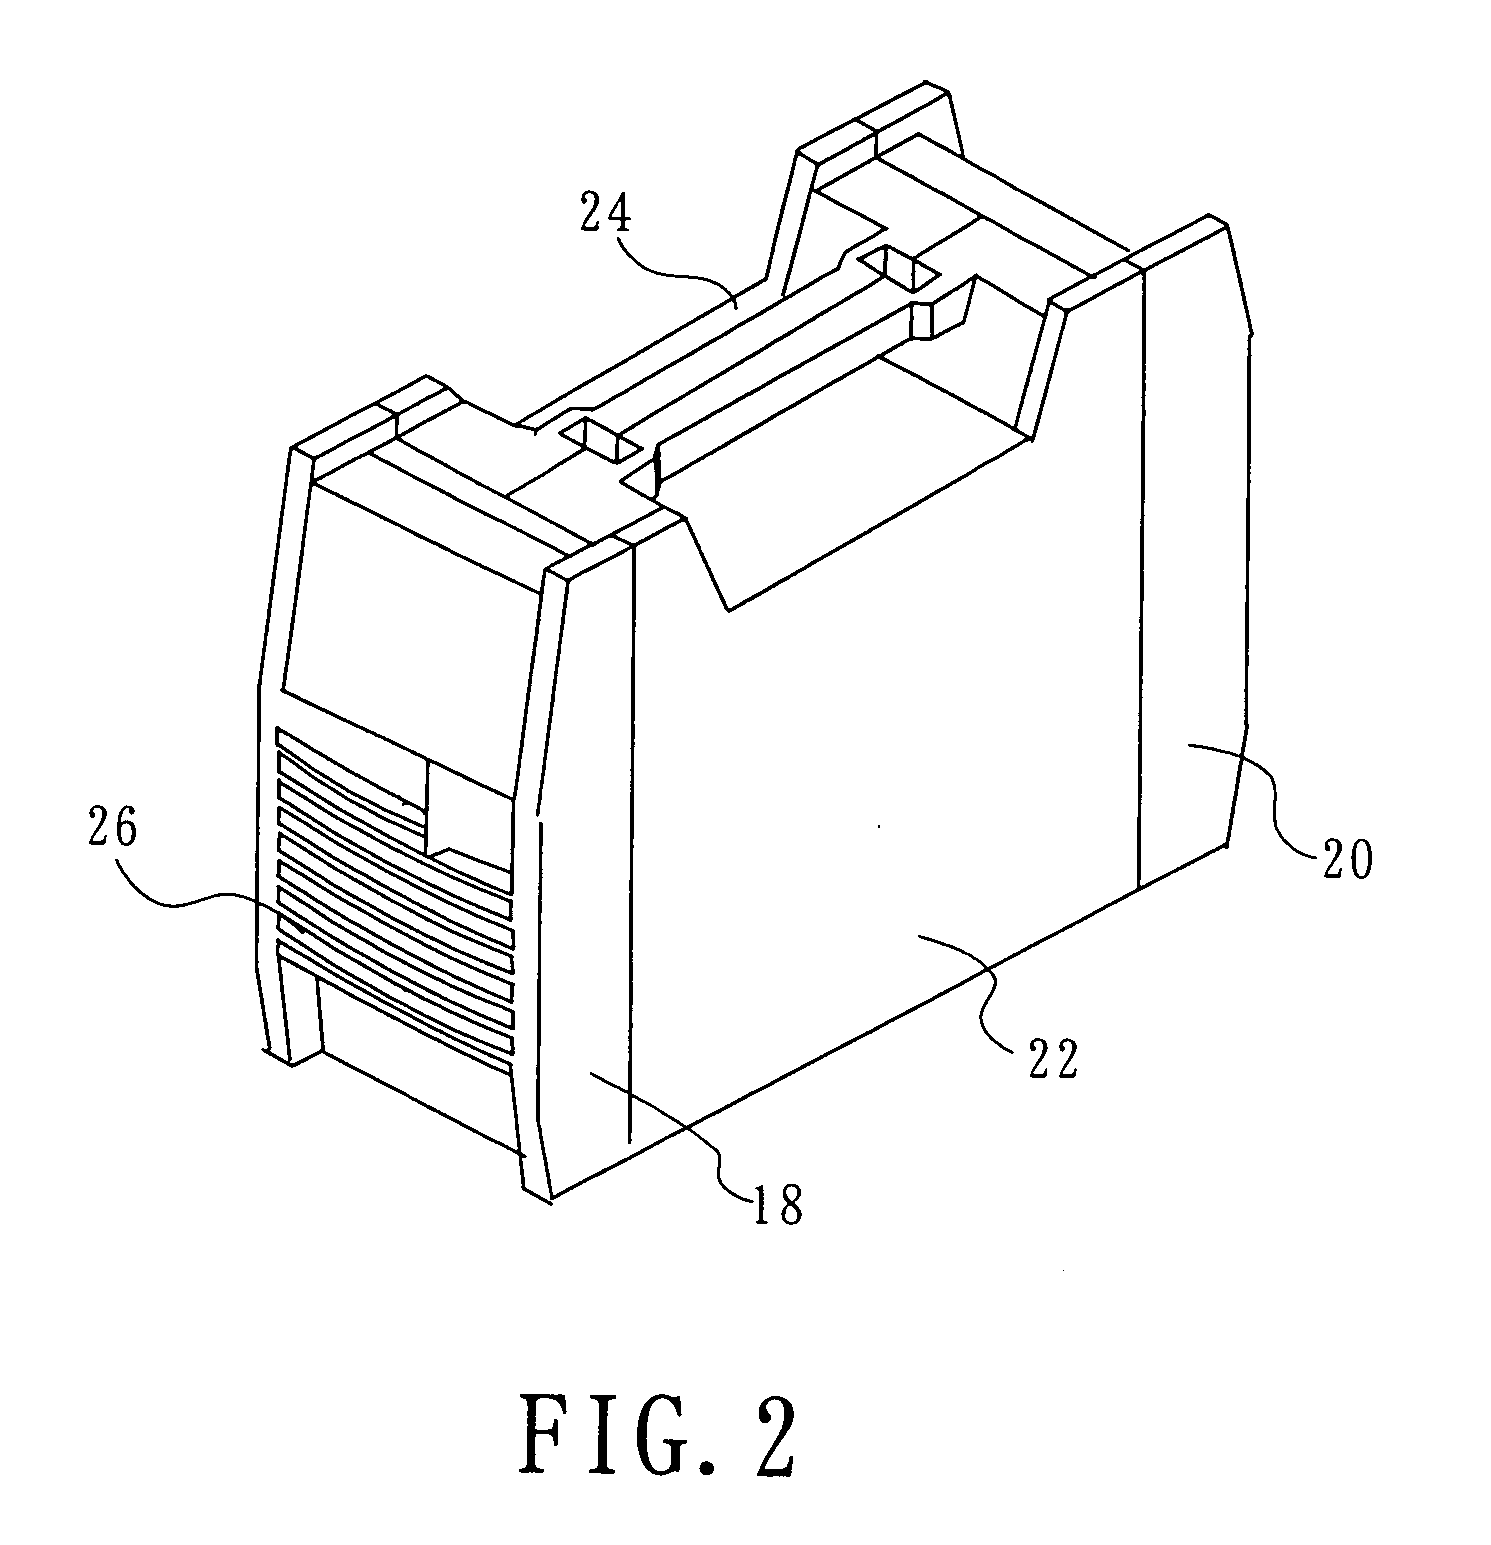 Heat-generating component cooling structure